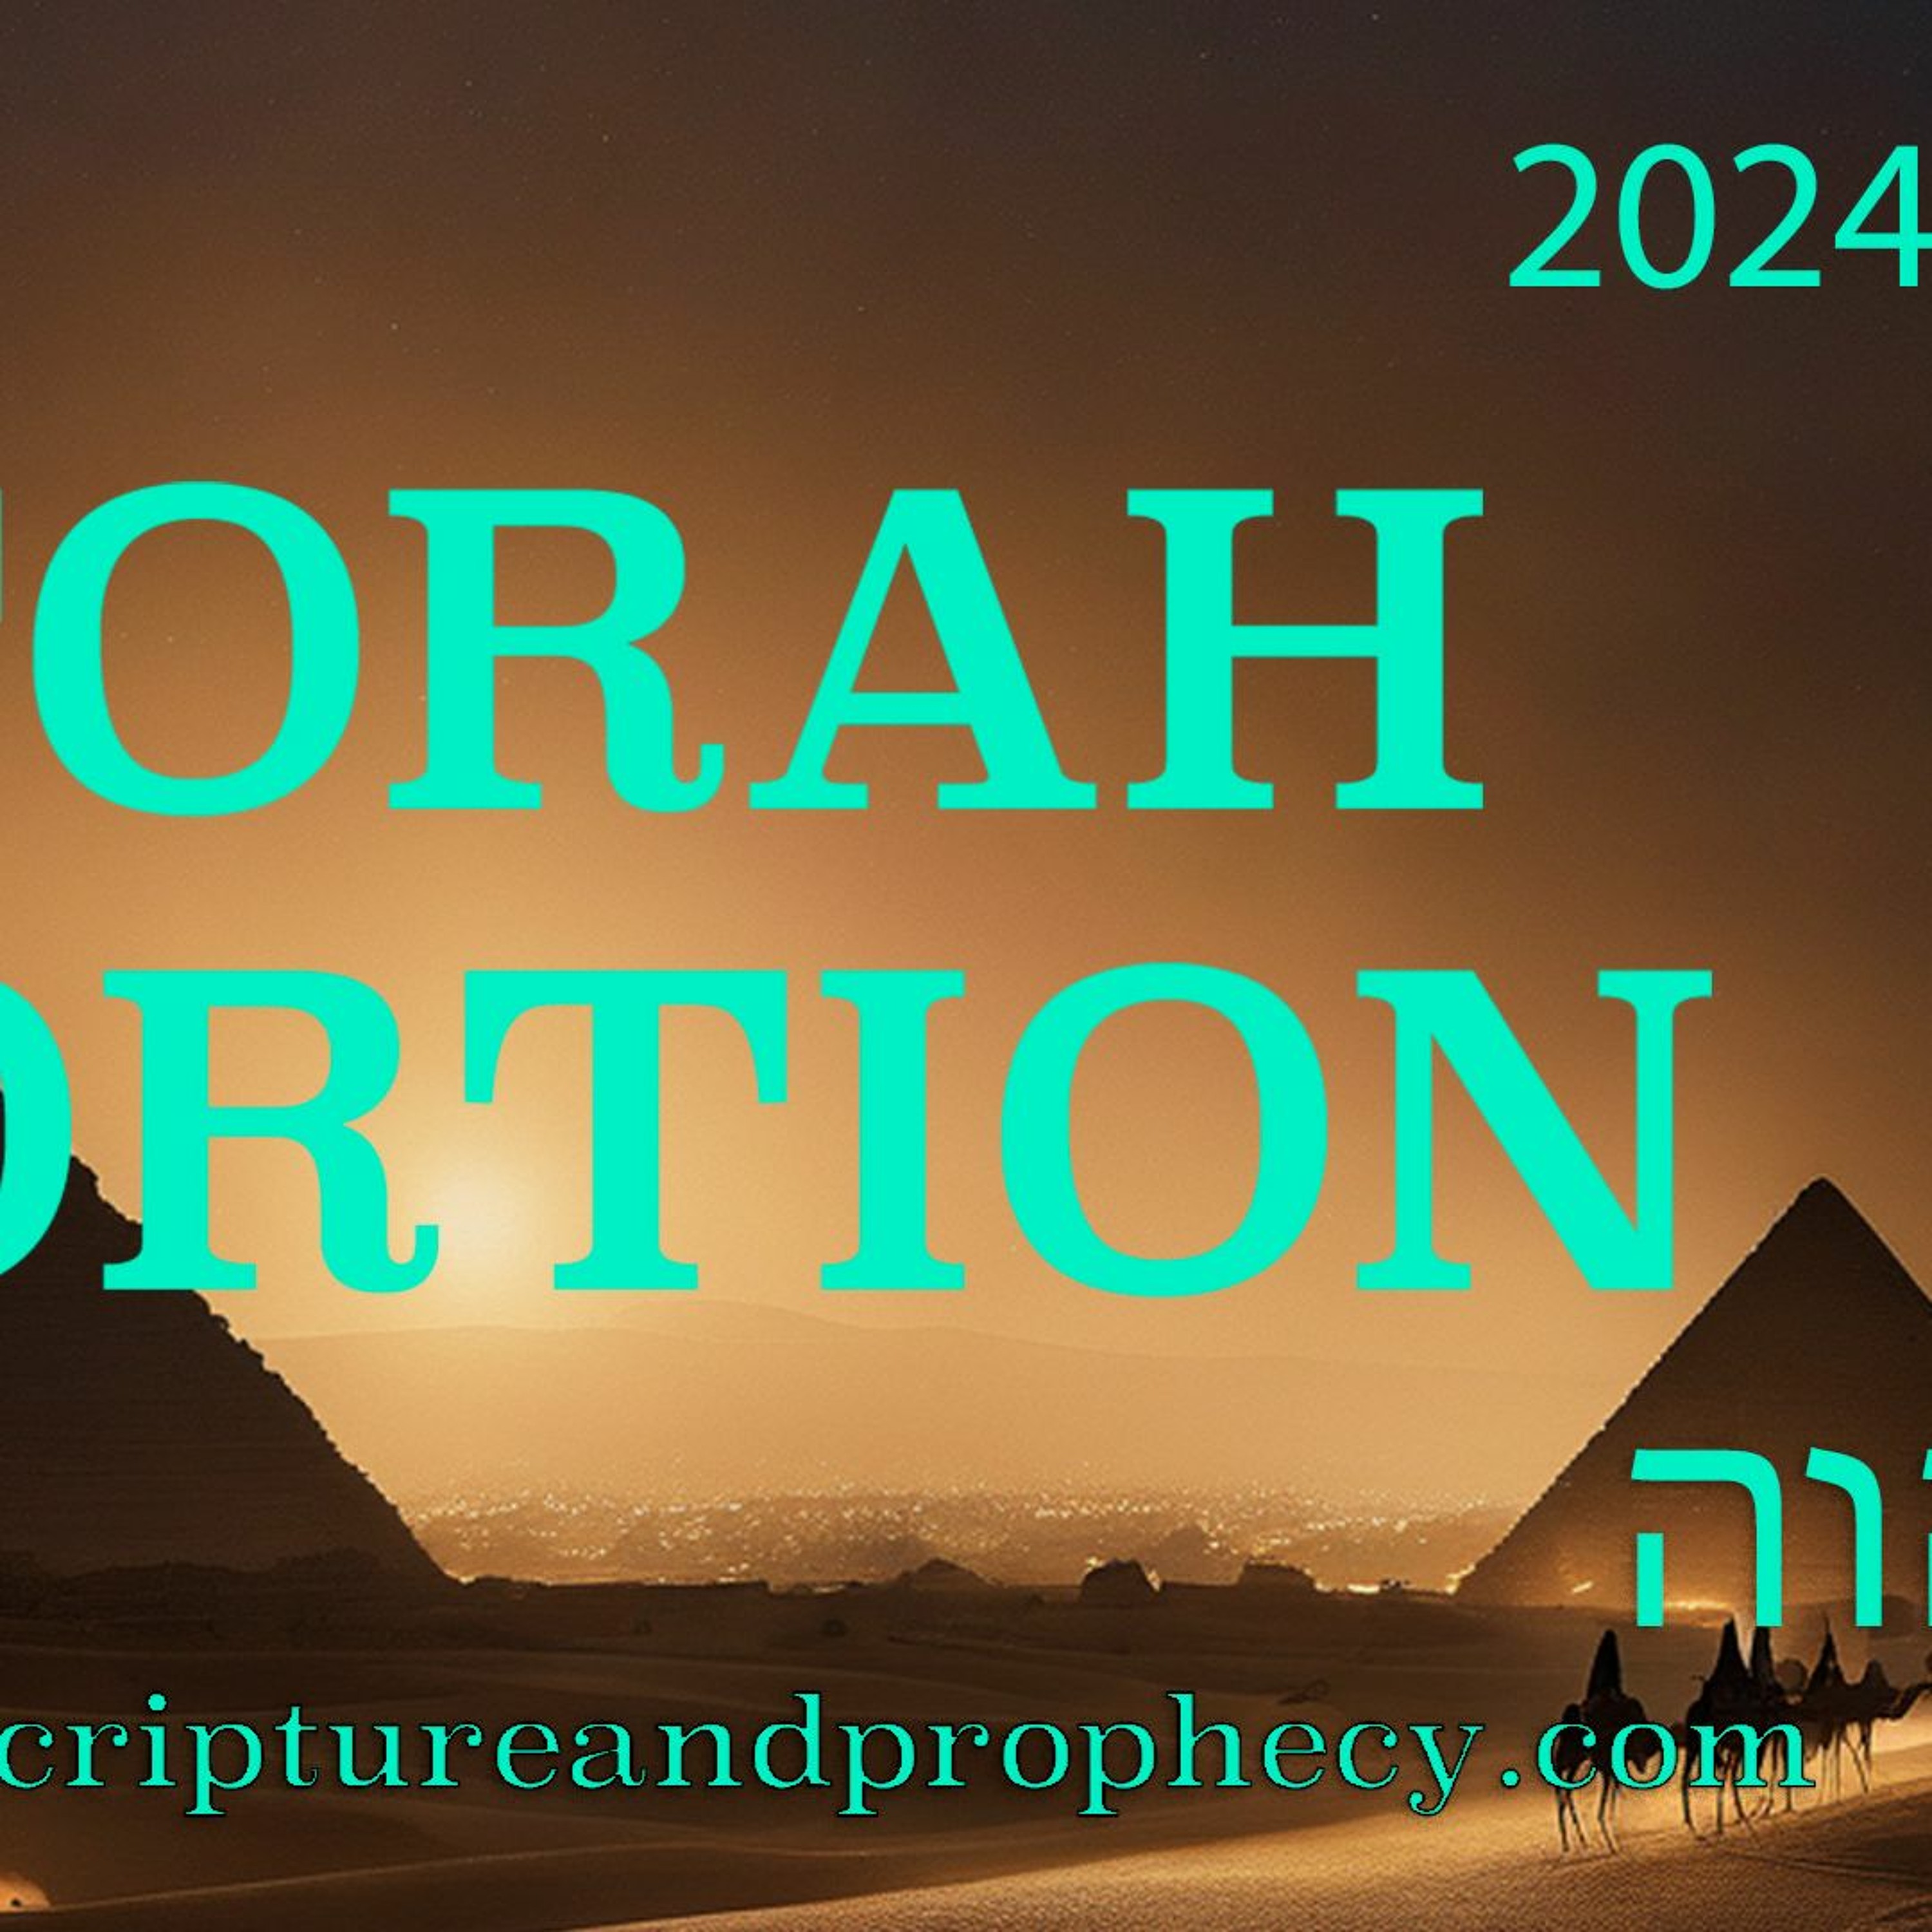 Torah Portion - Bo : Exodus 10–13:16 - The Tenth Plague, The Passover, and The Exodus